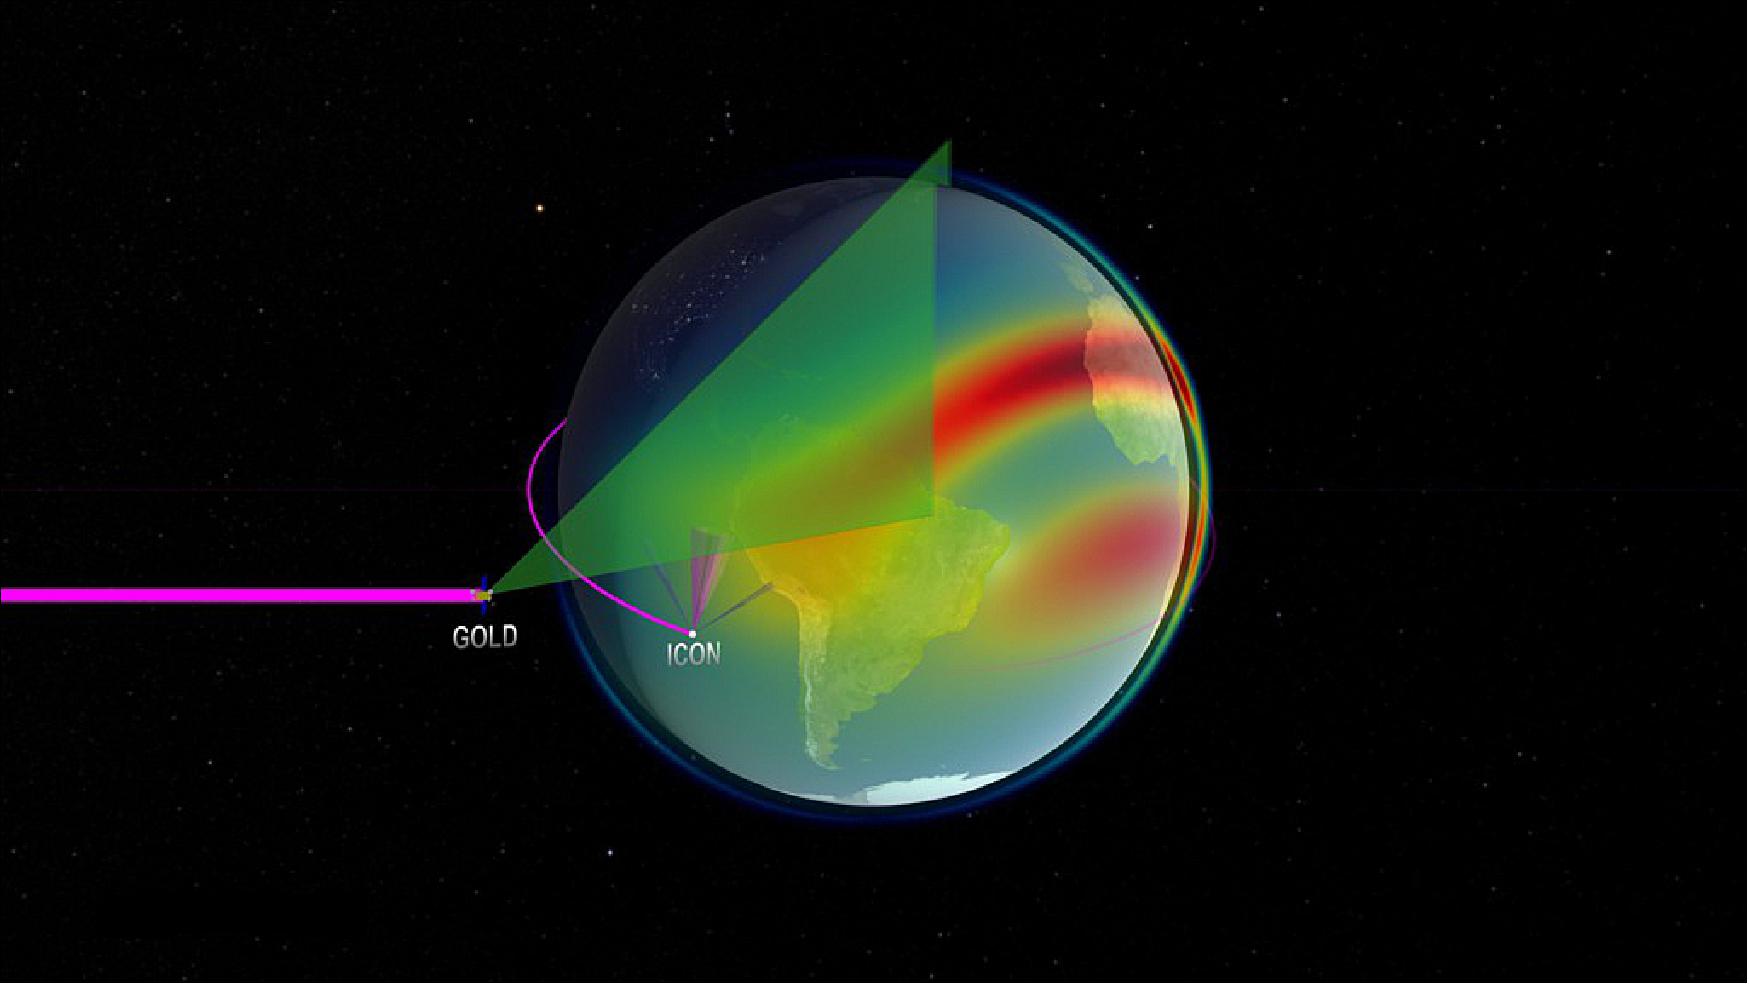 Figure 29: A basic view of the orbits and scanning profiles for ICON (in low-Earth orbit) and GOLD (in geostationary orbit) is shown in this visualization. Here, the colors over Earth represent model data of the density of a single ionized oxygen atom at an altitude of 350 kilometers. Red represents high density ( image credit: NASA GSFC’s Scientific Visualization Studio)